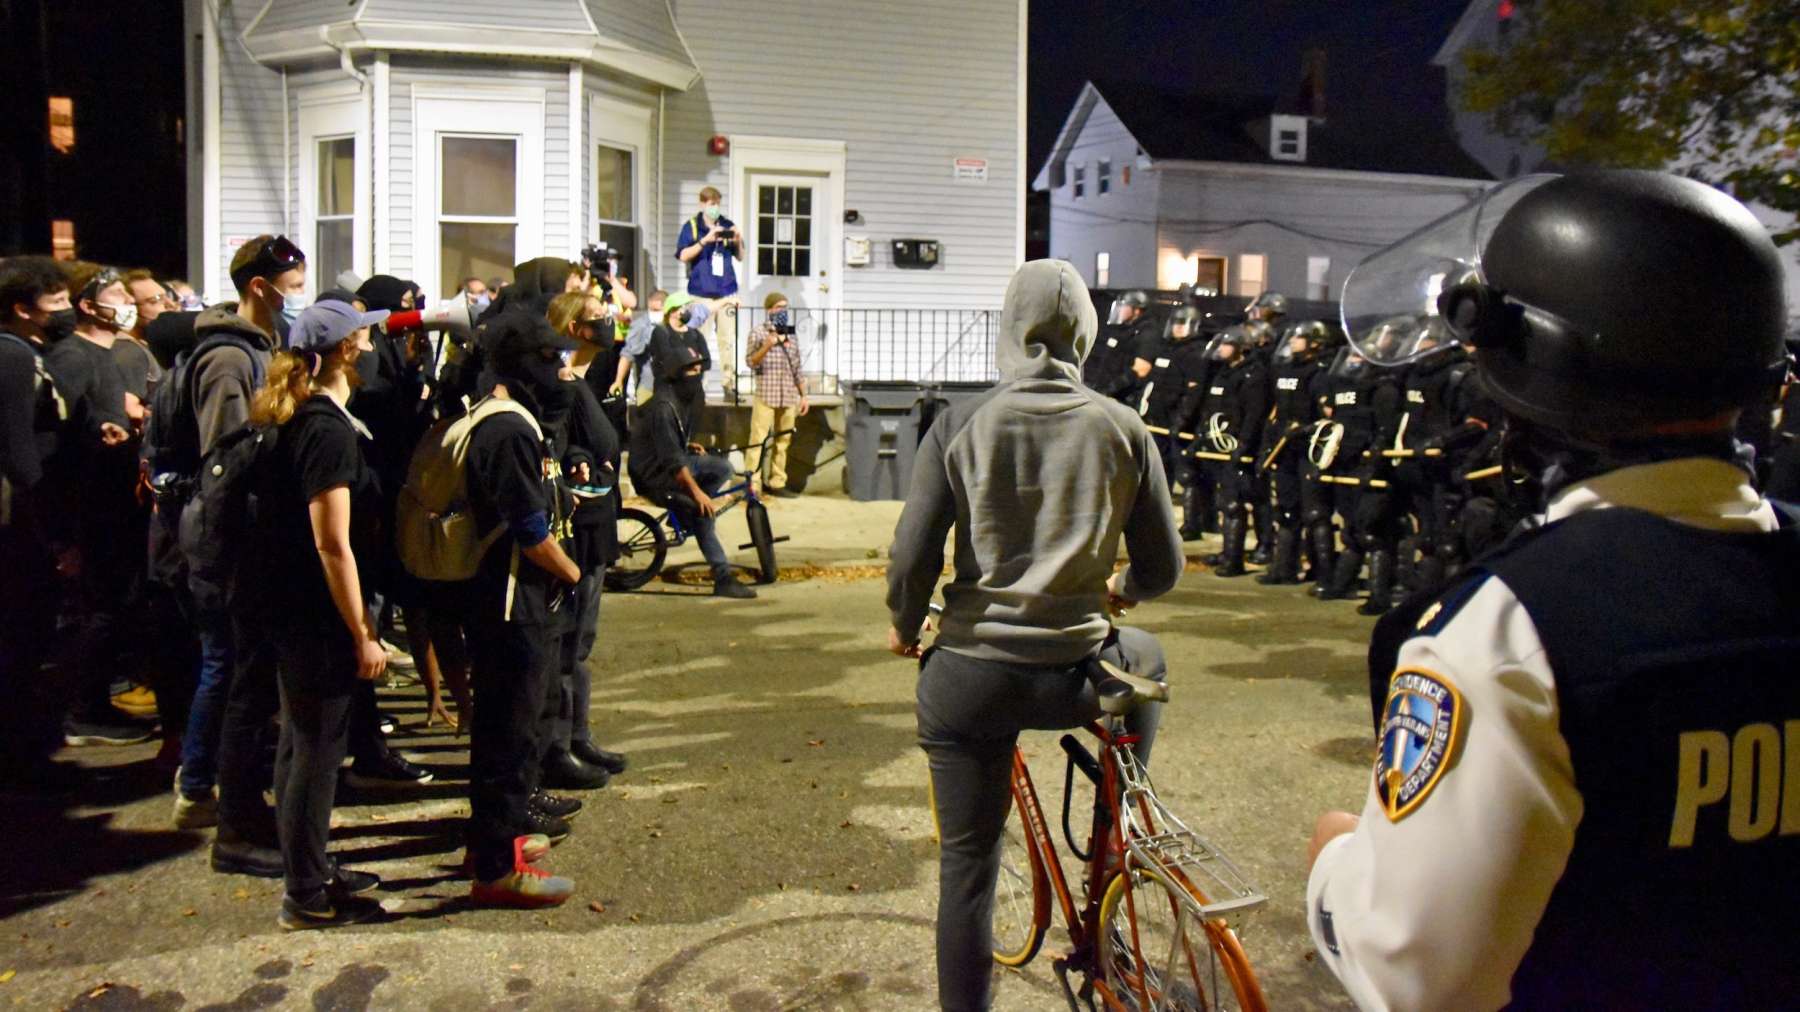 Police in riot gear prevent Federal Hill restaurant patrons from viewing peaceful protesters